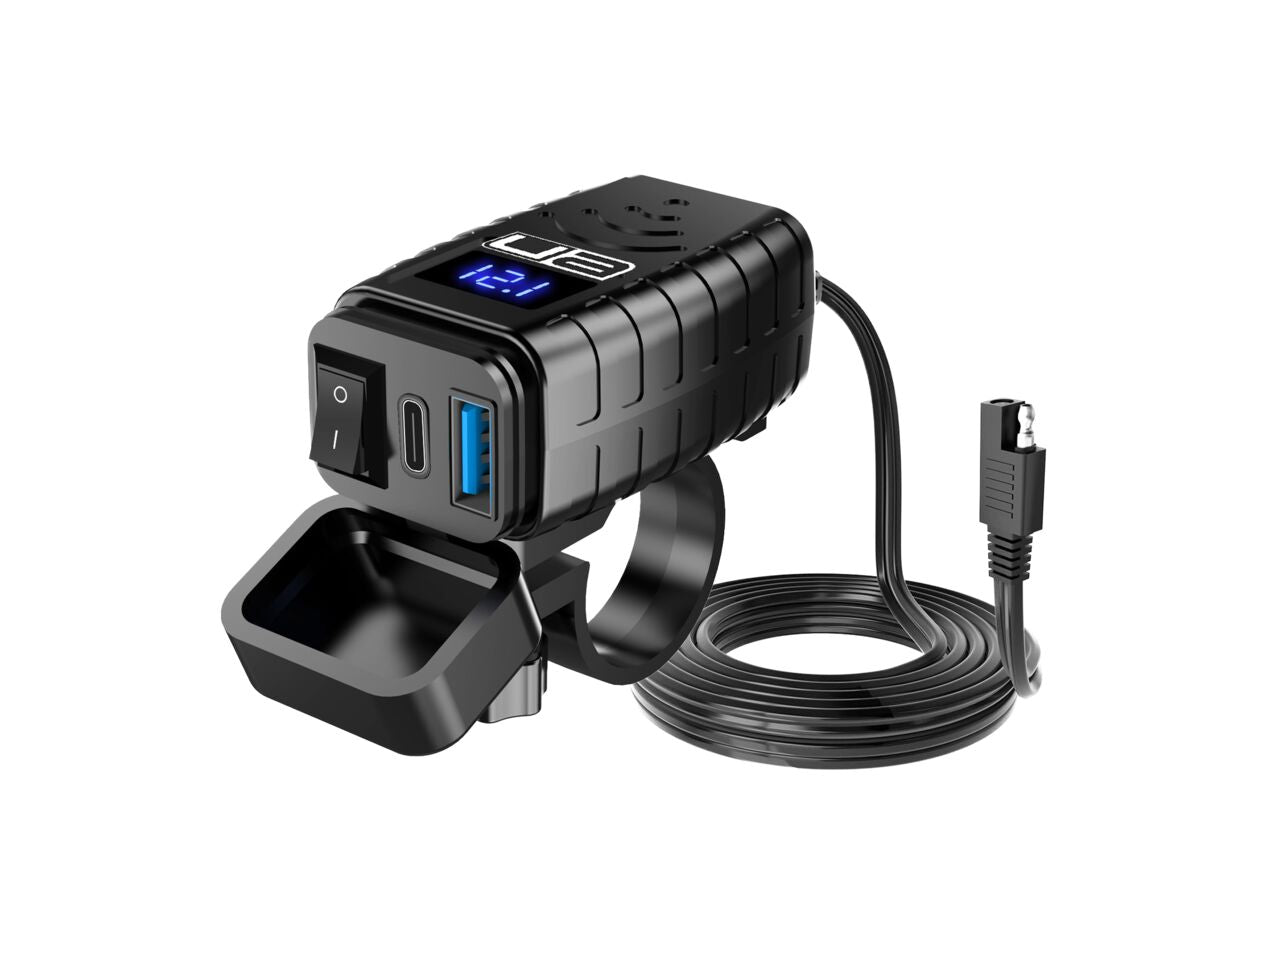 Motorcycle Usb Charger Power Socket Outlet Adapter Waterproof 12V, USB  Port, Motorcycle Mobile Phone Power Supply Waterproof toma usb moto Port  Sot